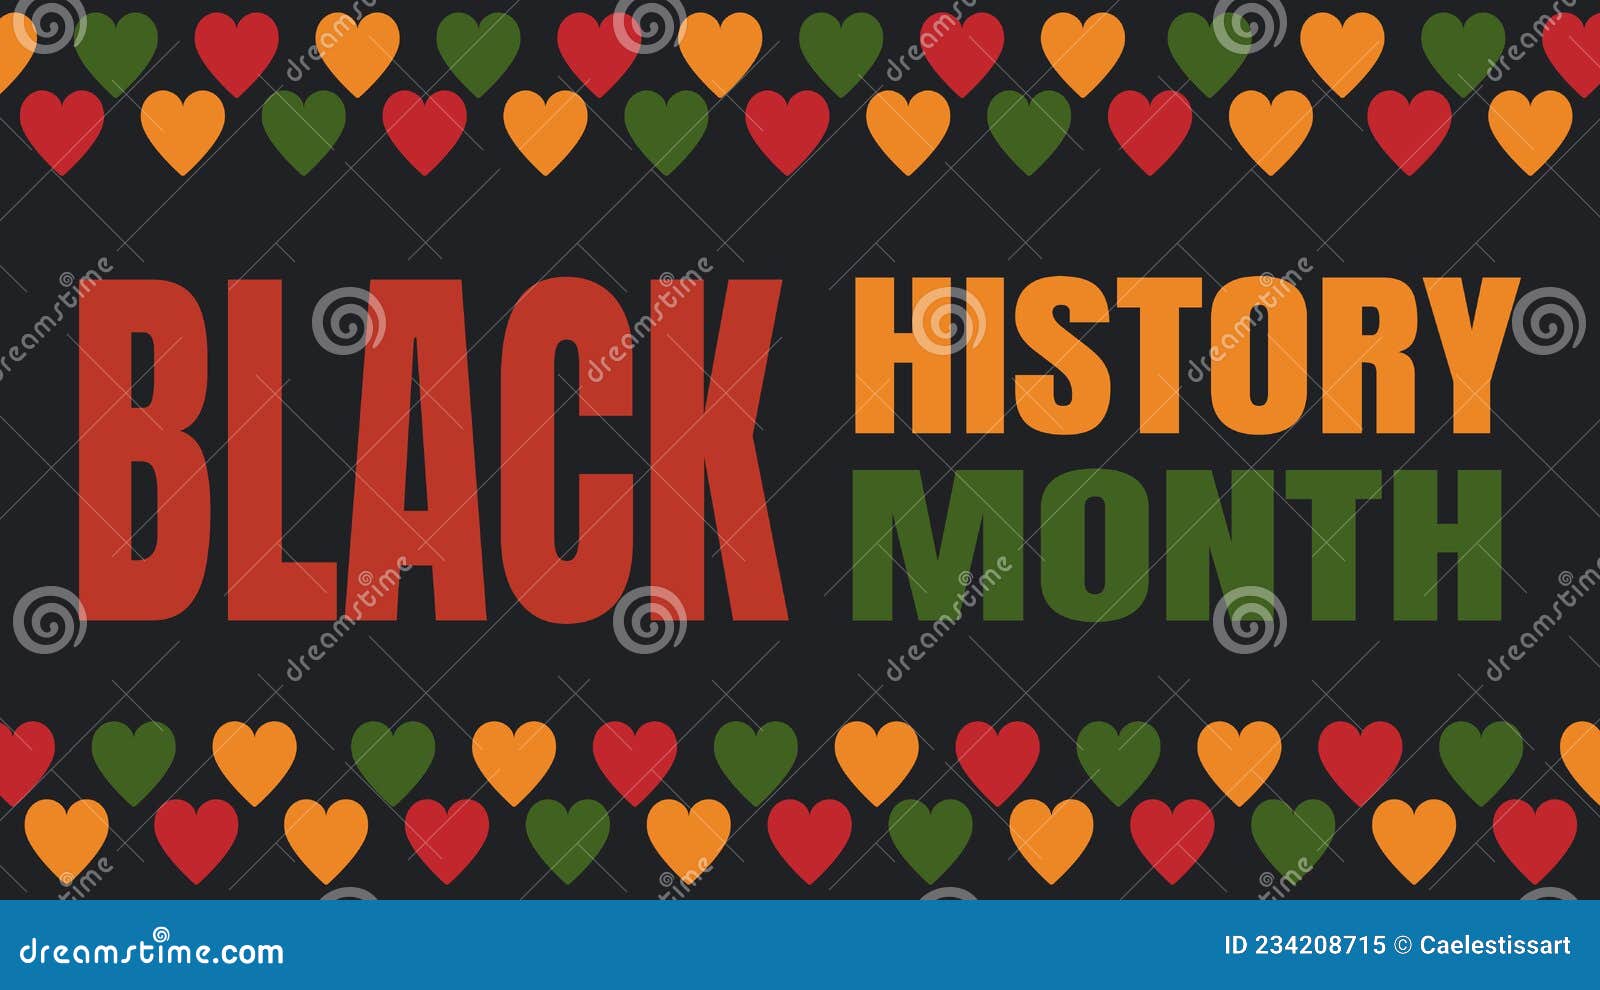 black-history-month-african-american-celebration-in-usa-vector